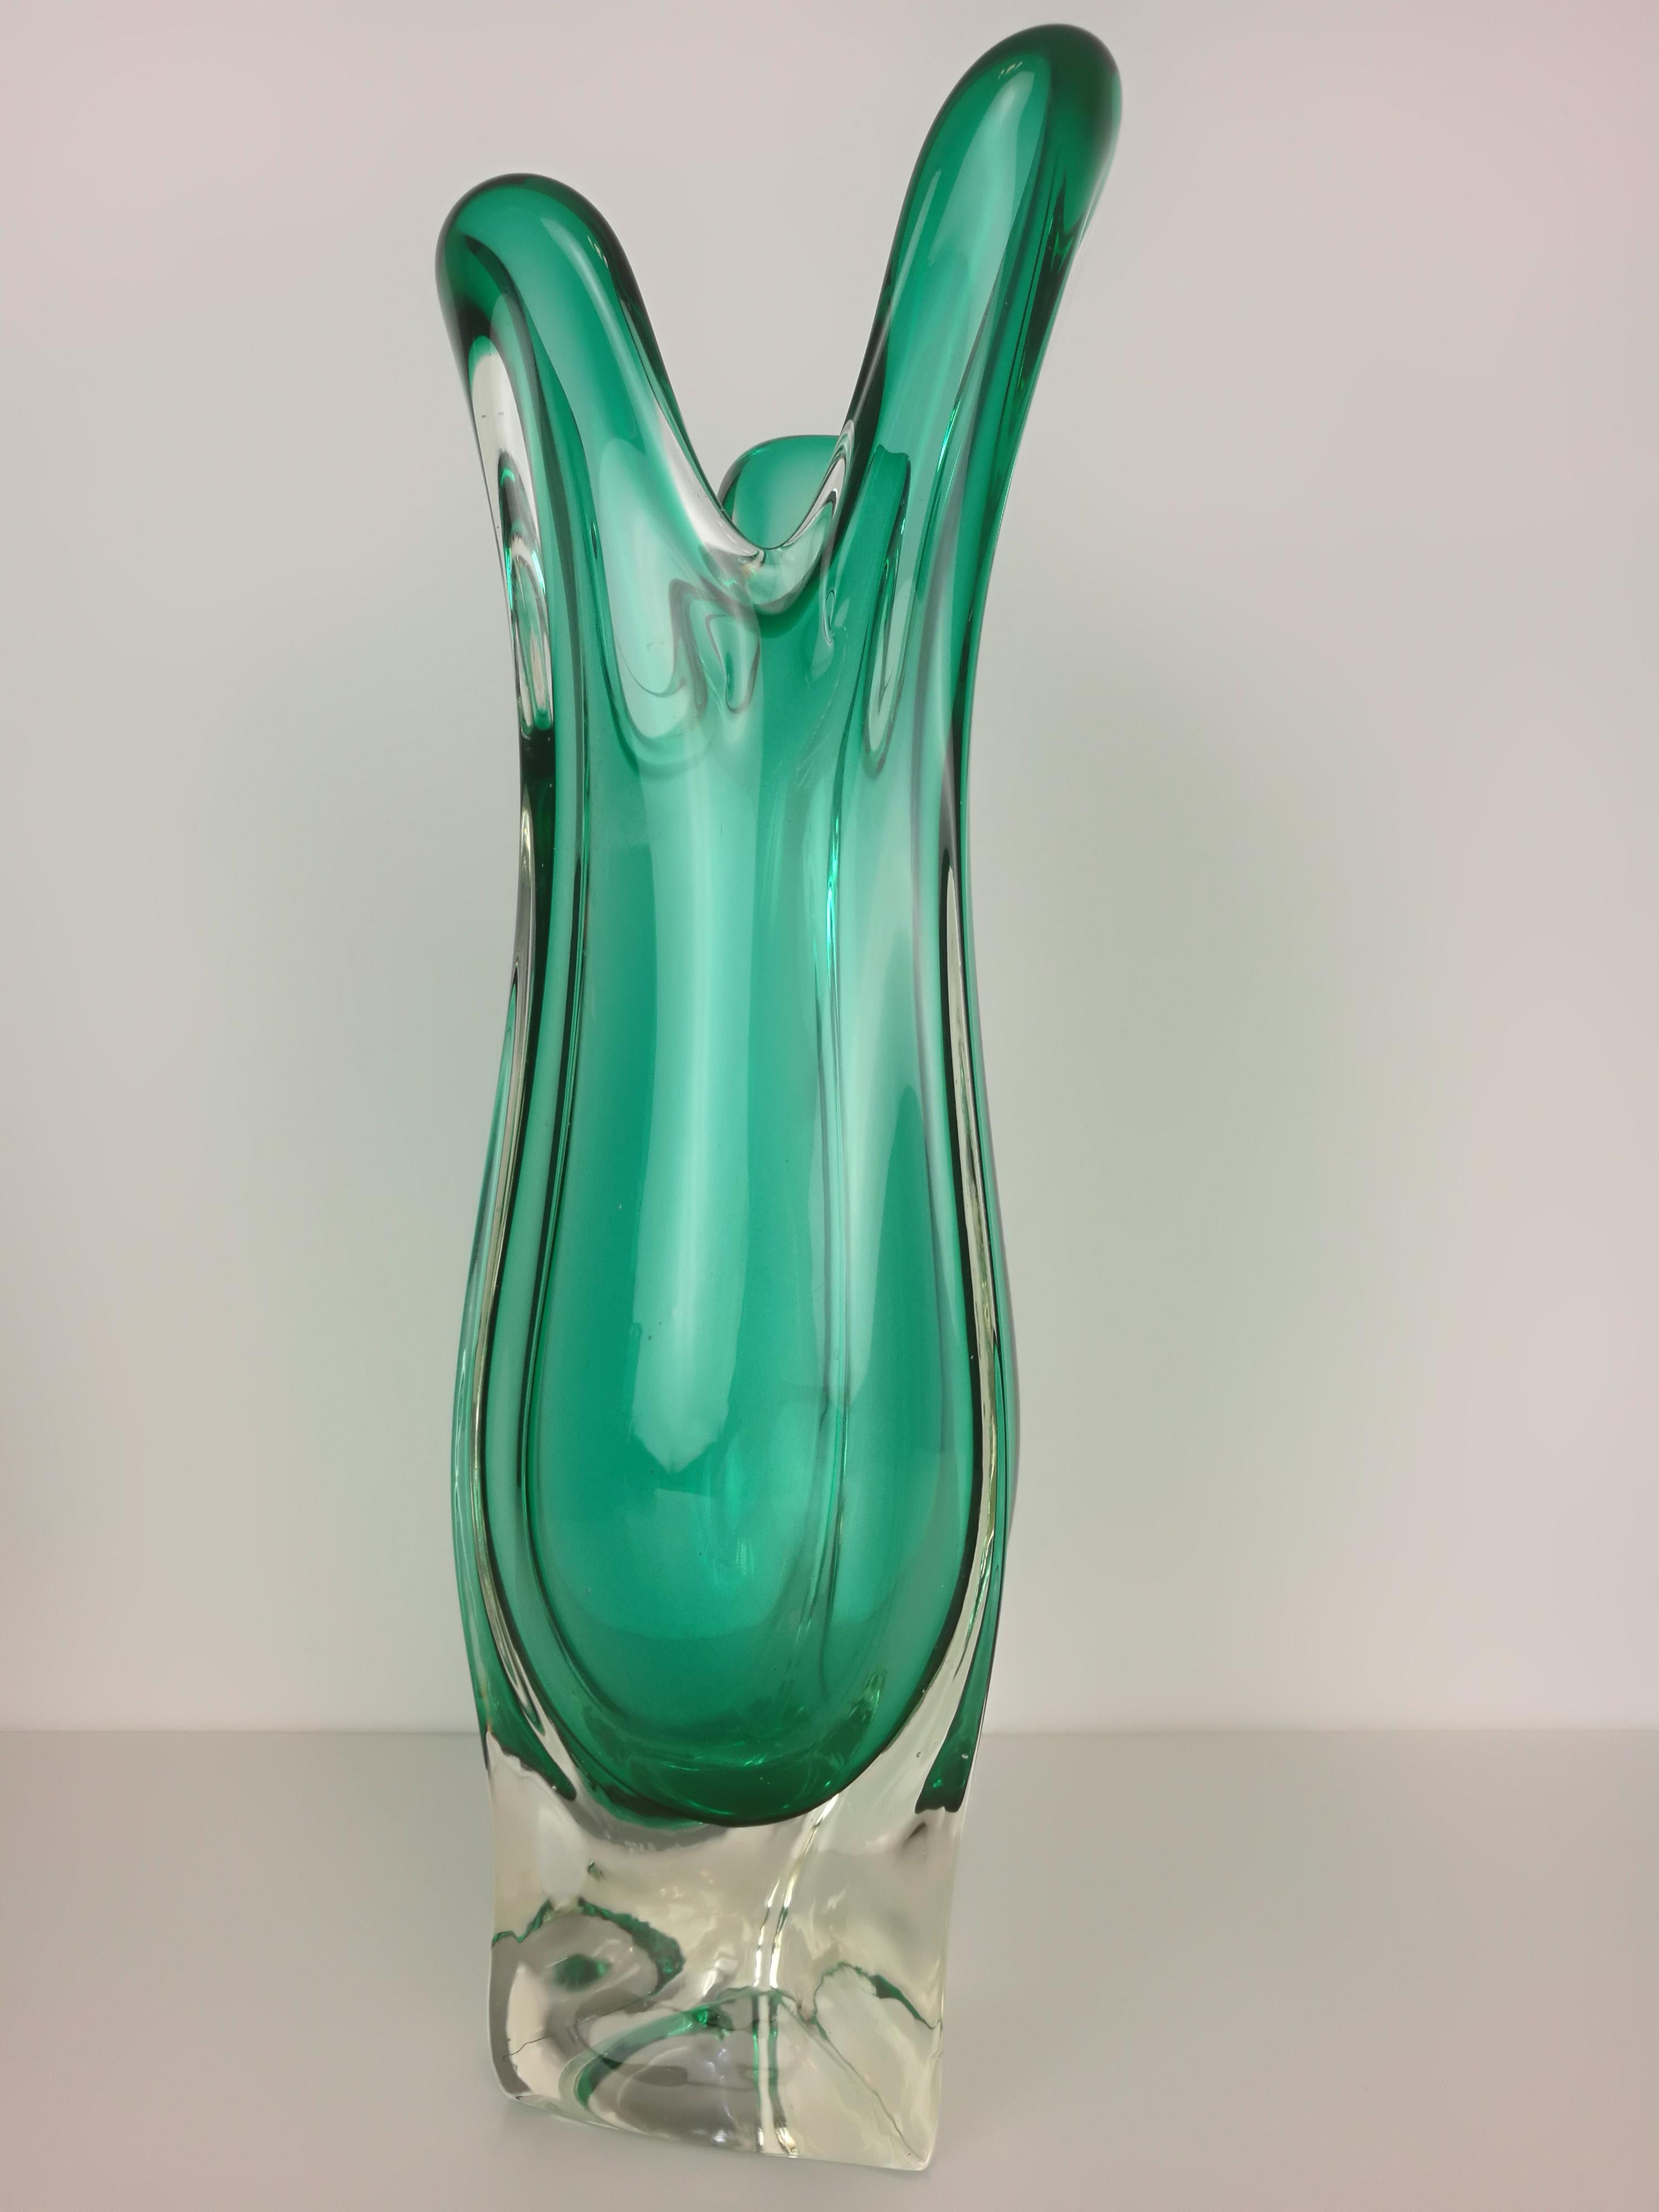 Great emerald green swung Murano vase. Beautiful for any type of decor.
Would be great on a mantel (fireplace), bookshelf or table. In excellent vintage condition. Nice and clear.
Made in the 1960s-1970s. 

The vase stands approximately 16.9